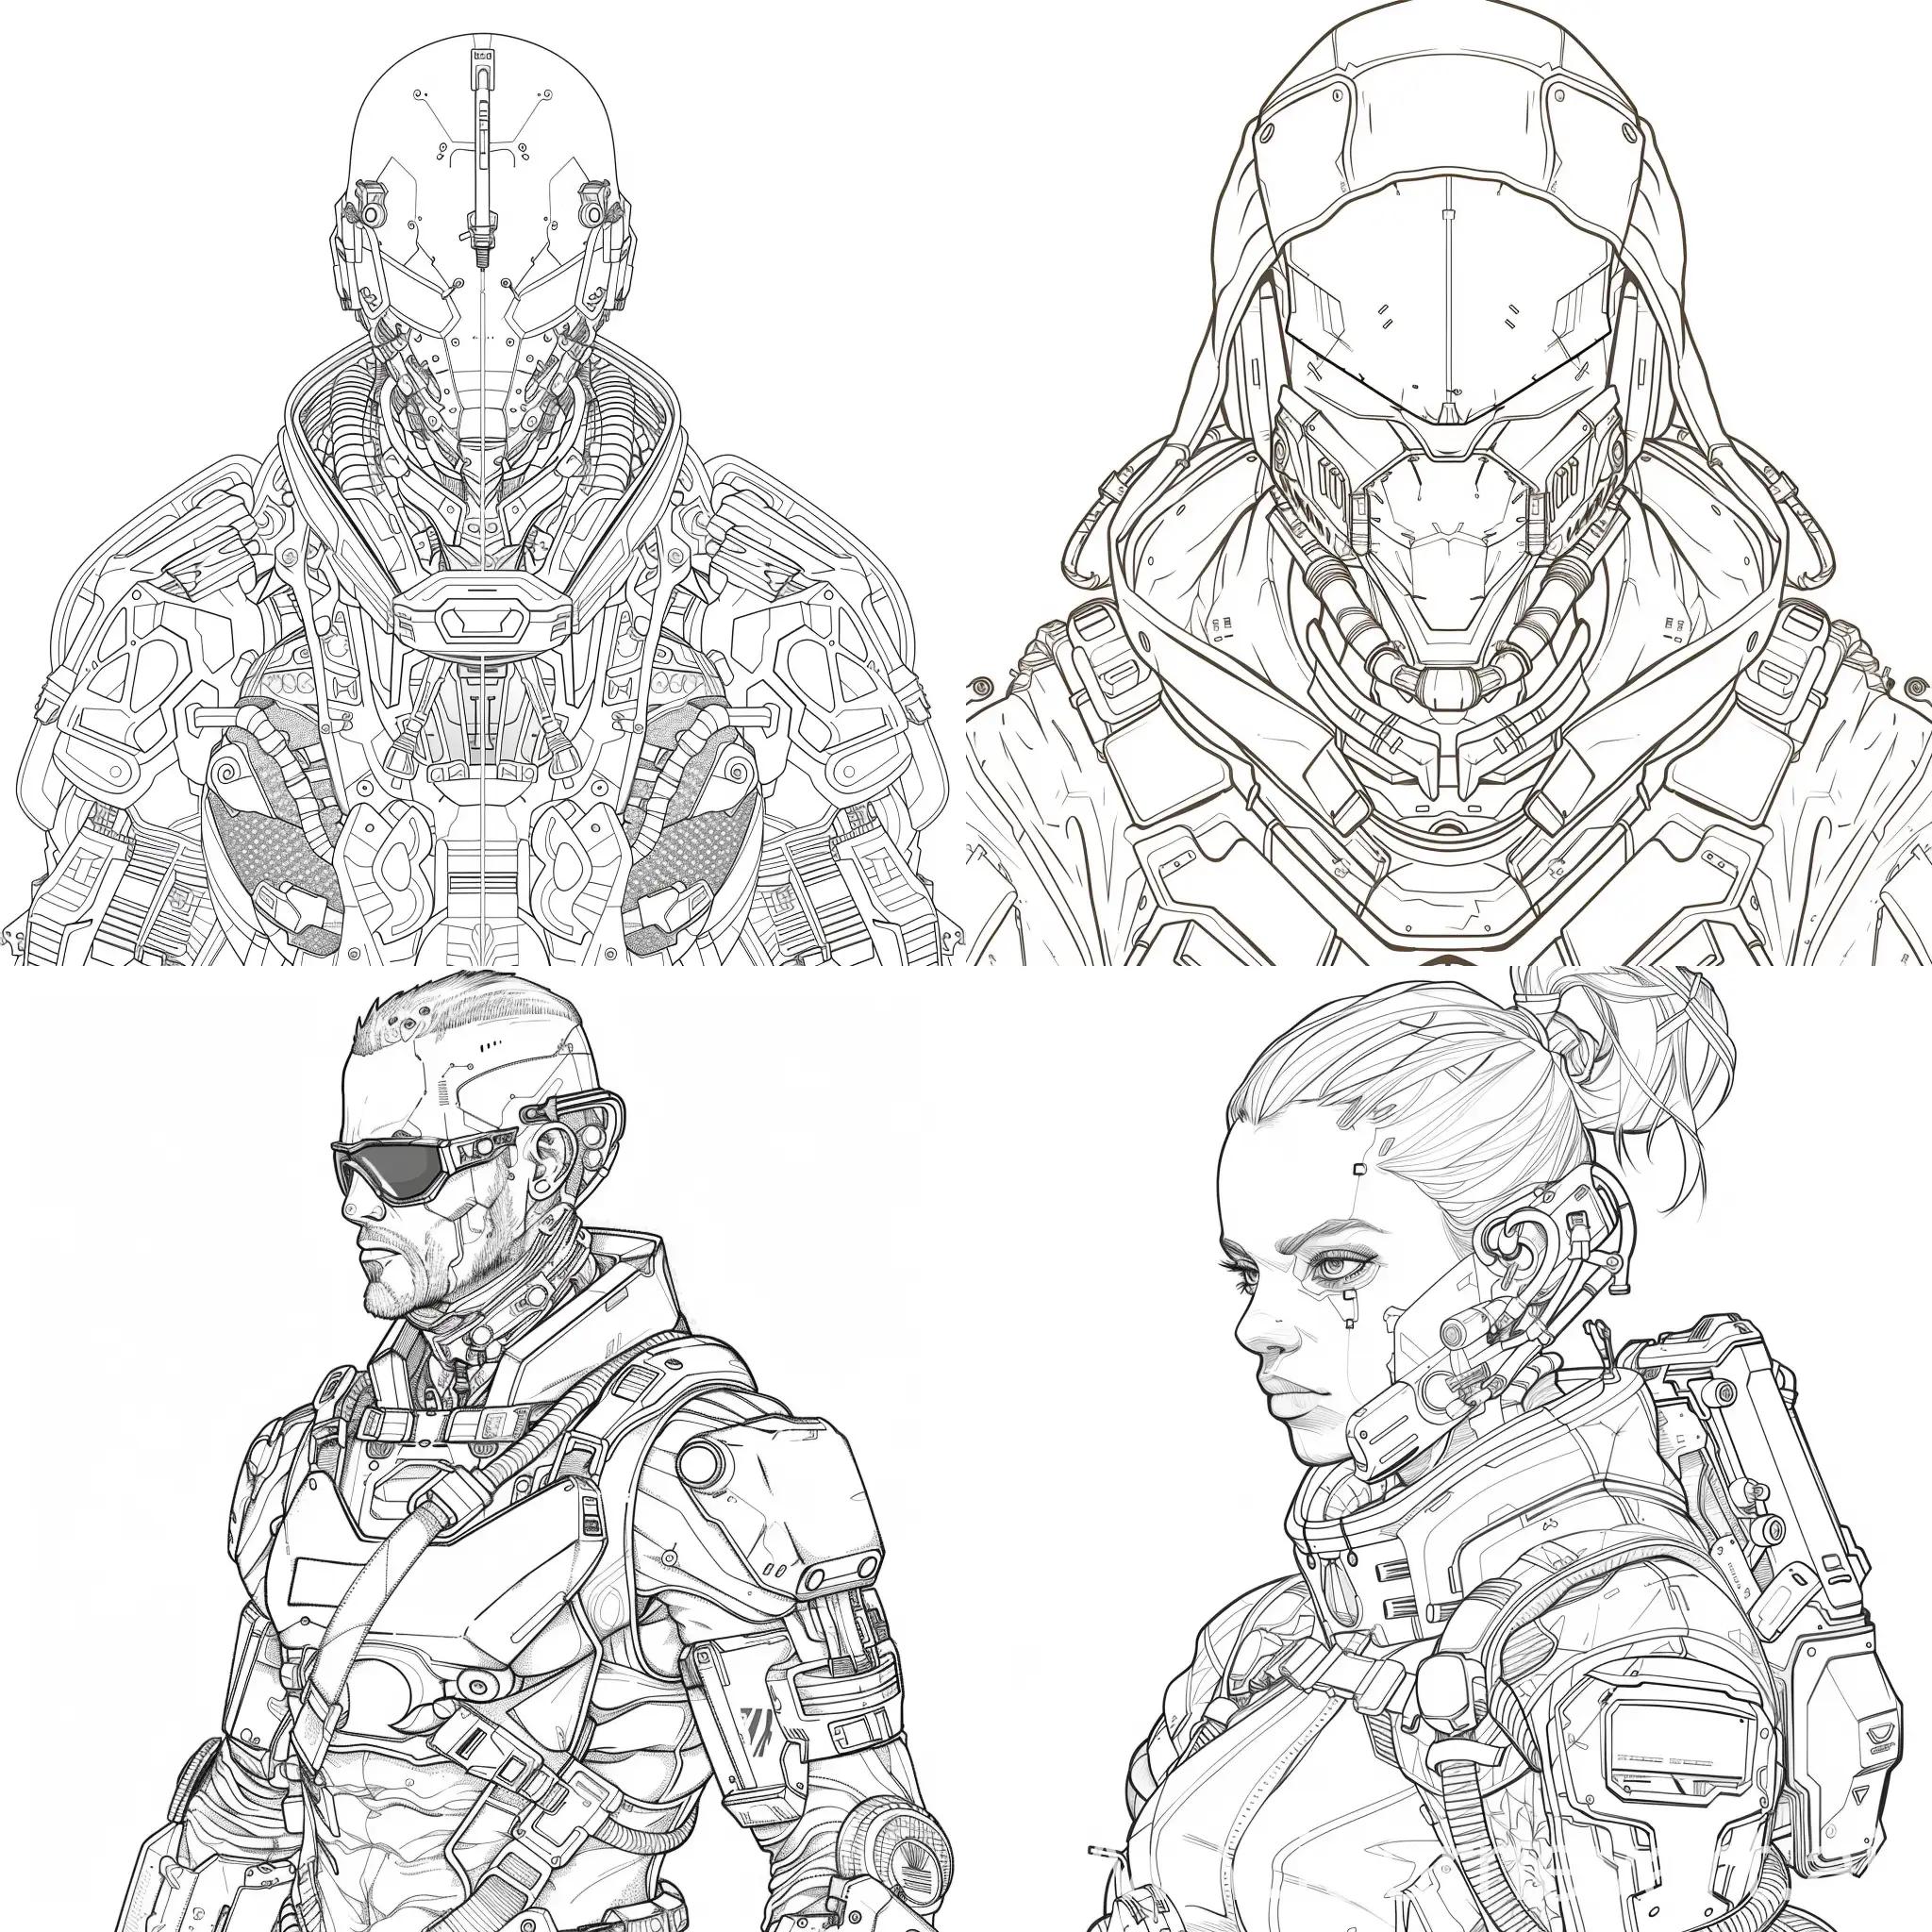 Cyberpunk-Warrior-Coloring-Page-for-Printing-Black-and-White-Vector-Image